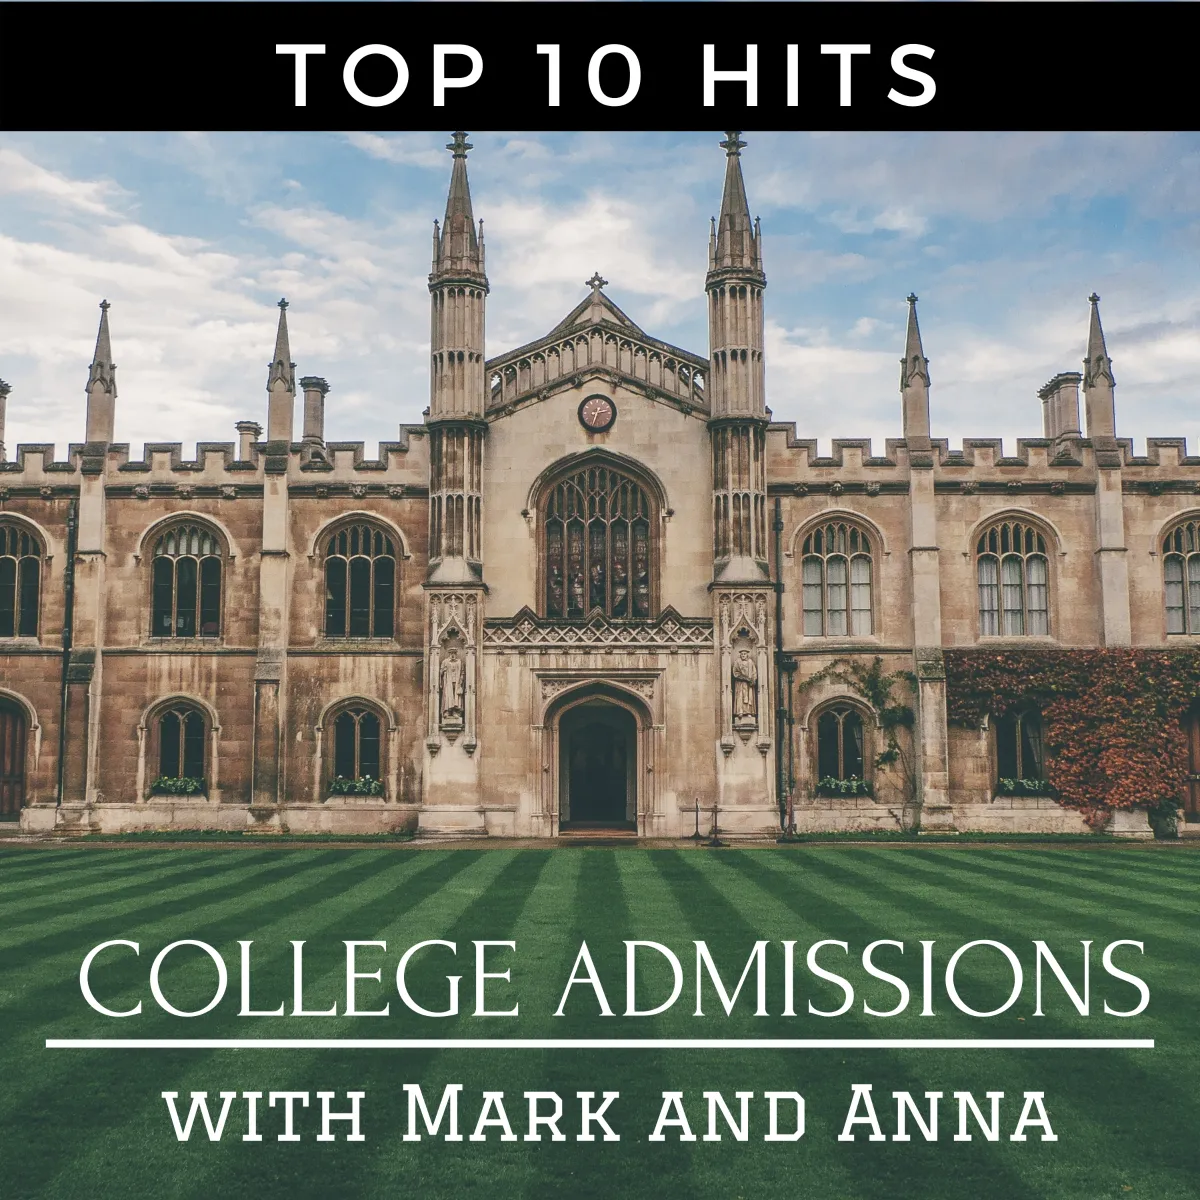 Top Hits: 10 Best College Admissions Episodes